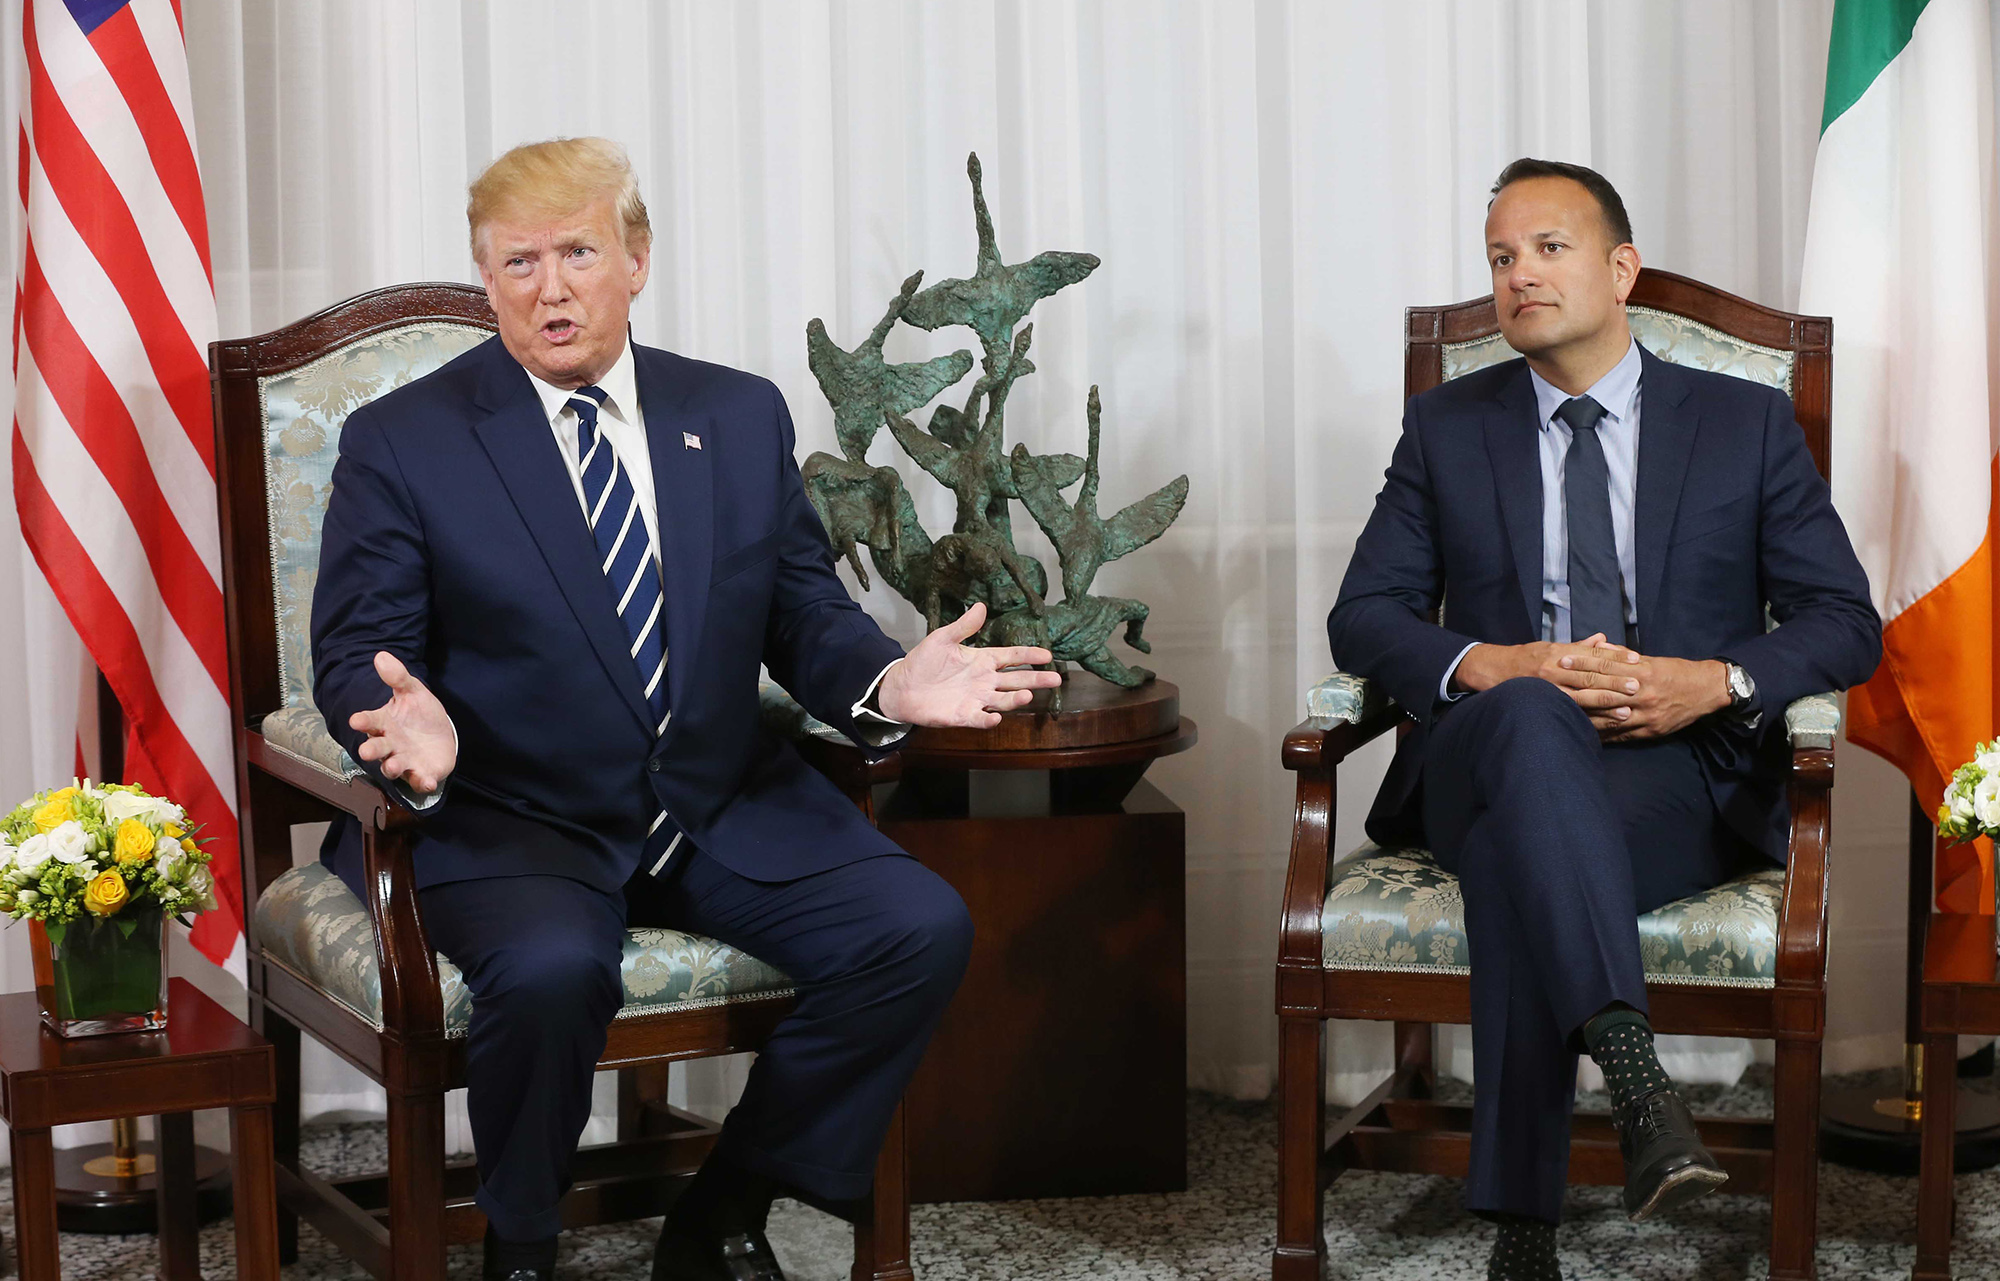 Donald Trump during a&nbsp;meeting with&nbsp;Leo Varadkar at Shannon airport in Shannon, Ireland&nbsp;on June 5, 2019.